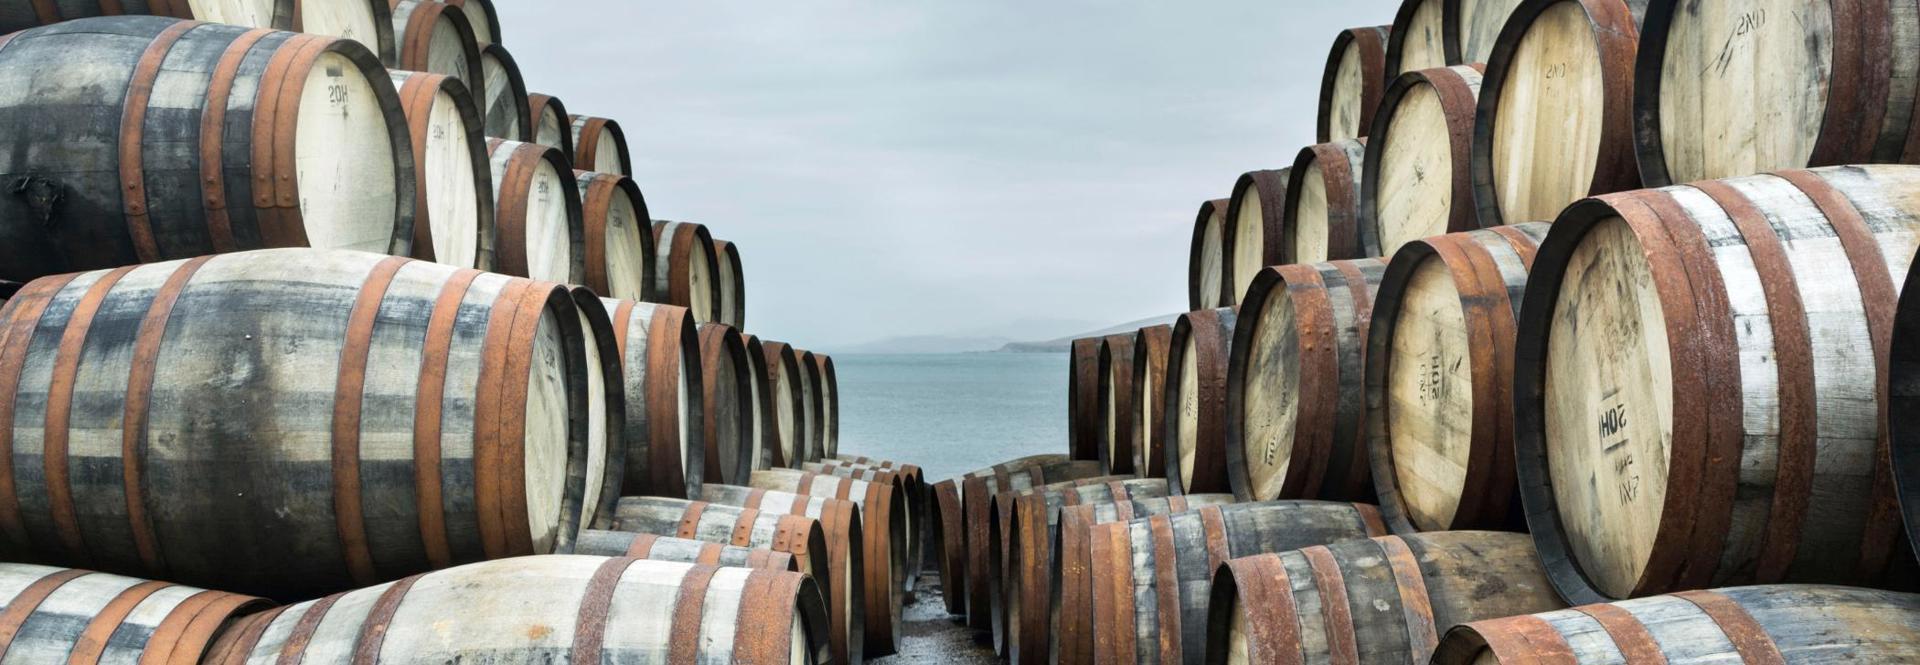 Whisky Cask Investment Private Clients - Cask Trade